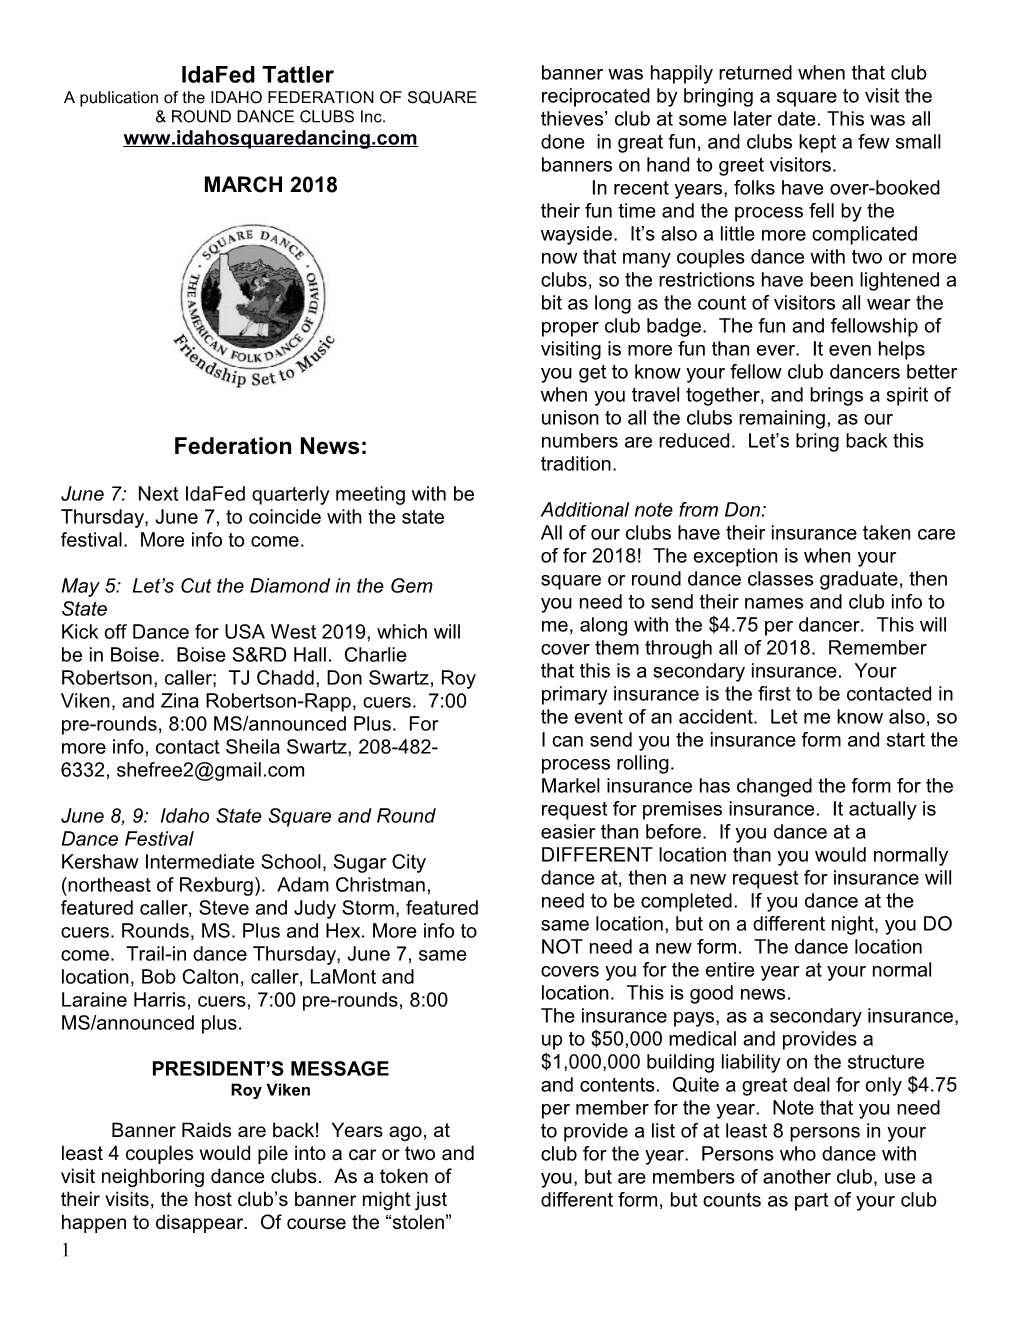 A Publication of the IDAHO FEDERATION of SQUARE & ROUND DANCE CLUBS Inc